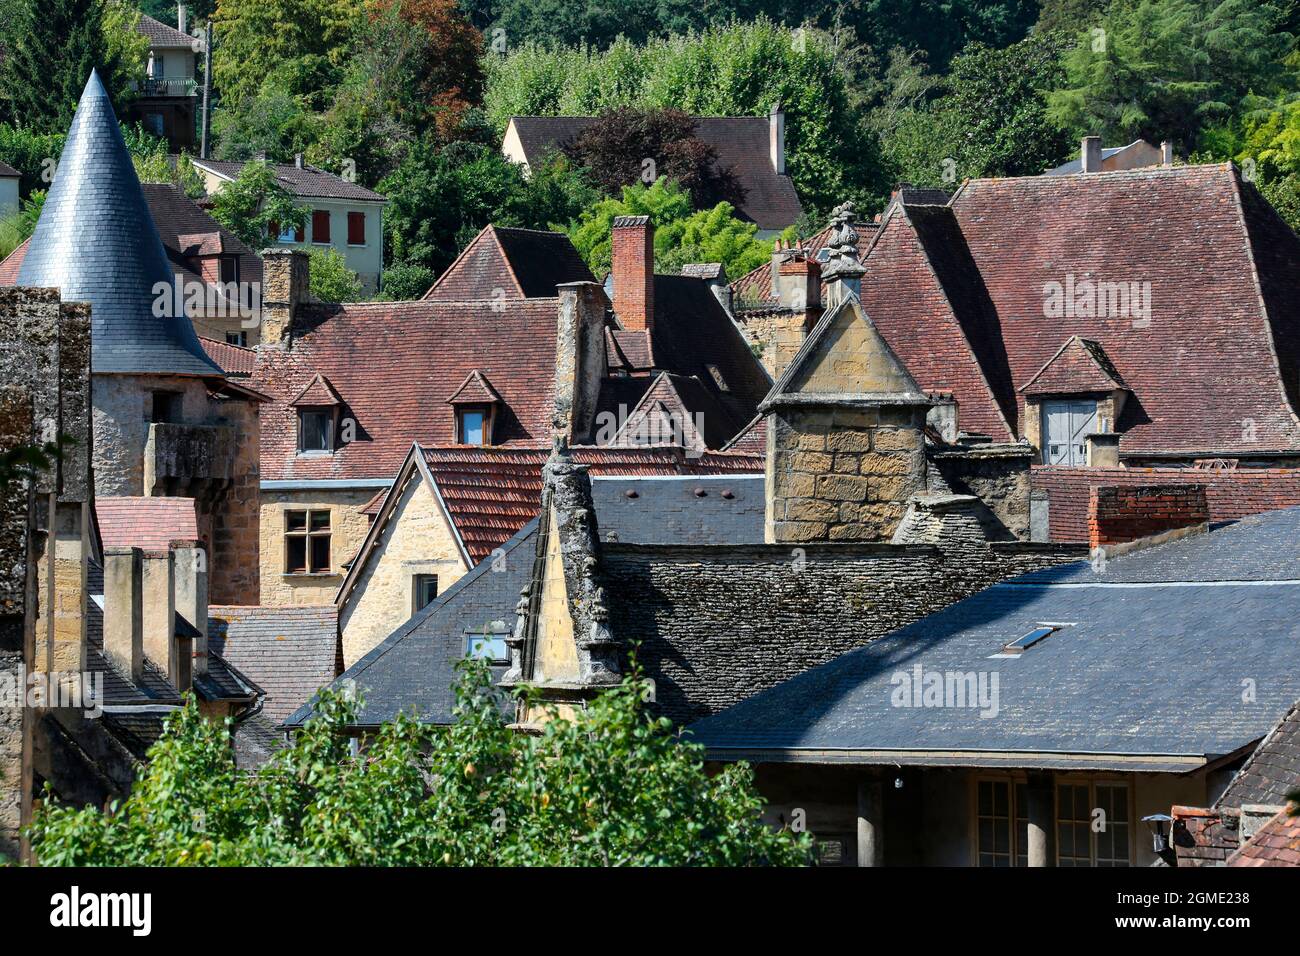 Historic medieval buildings in the old town of Sarlat (Sarlat-la-Caneda) in Preigord in the Dordogne in the Nouvelle-Aquitaine region of France. Becau Stock Photo